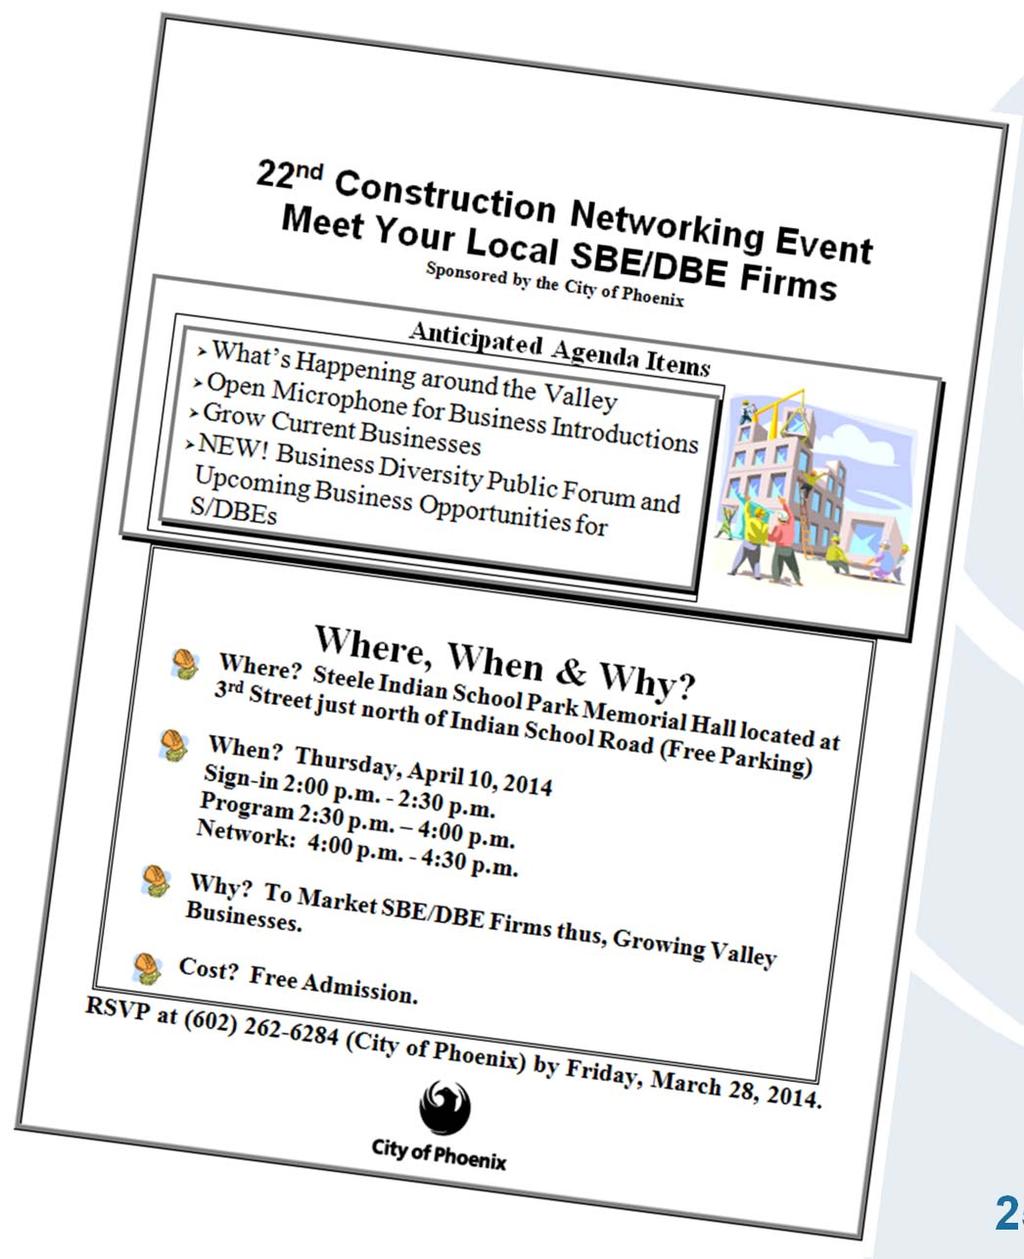 22 ND CONSTRUCTION NETWORKING EVENT sponsored by the City of Phoenix Meet your local SBE/DBE Firms Thursday, April 10 th Steele Indian